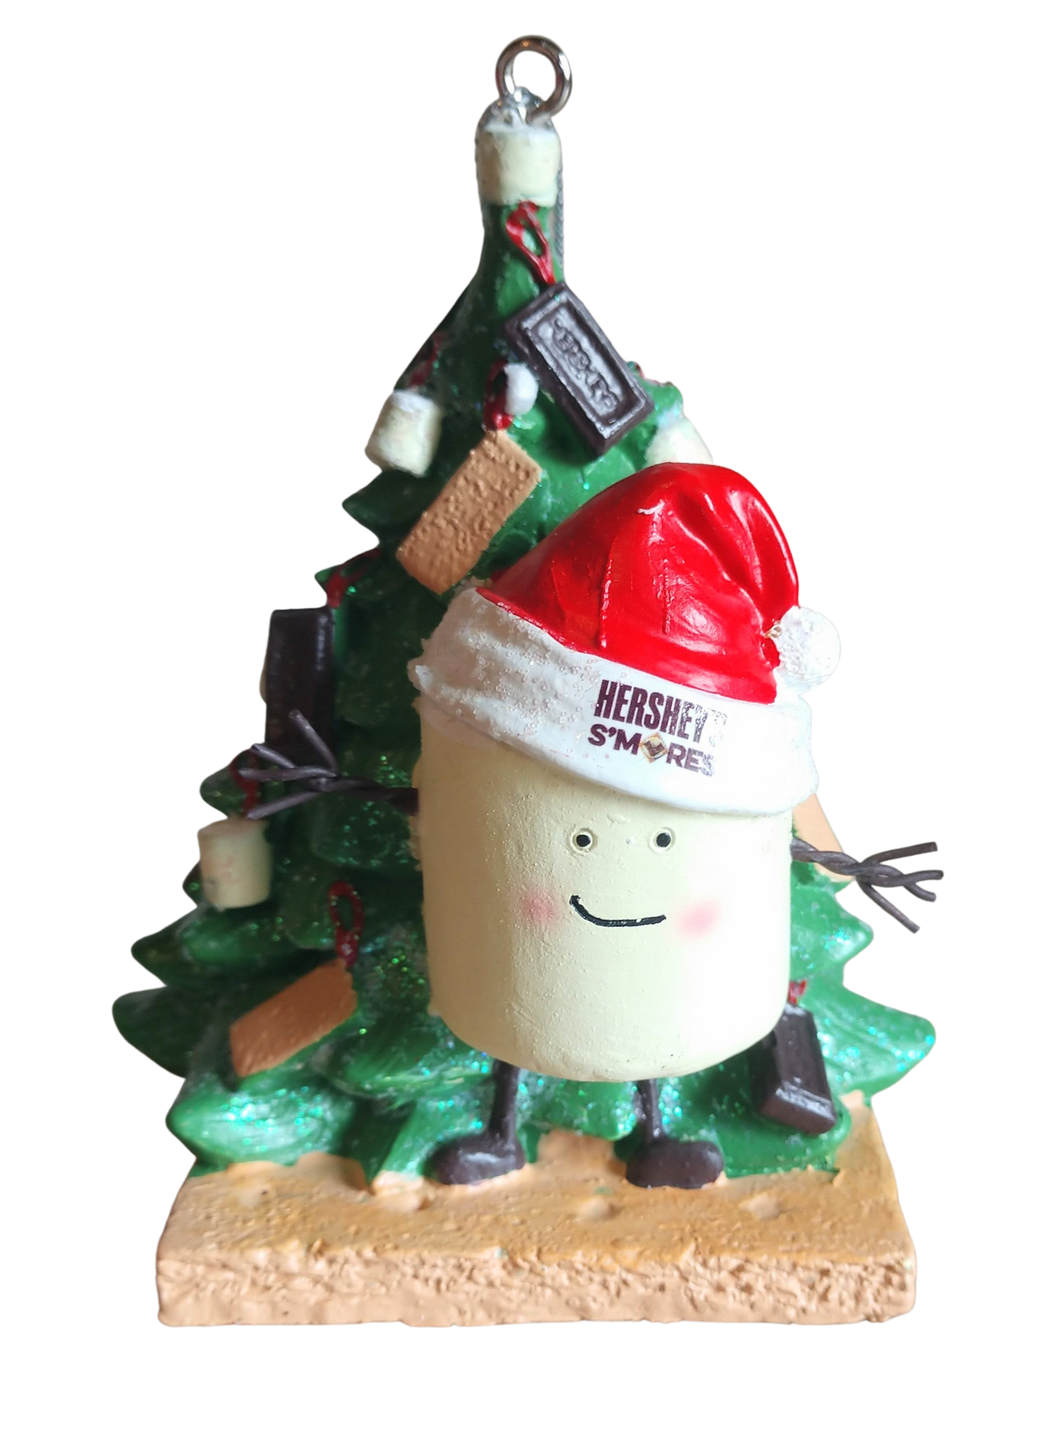 Hershey Smores Ornament with Christmas Tree 2